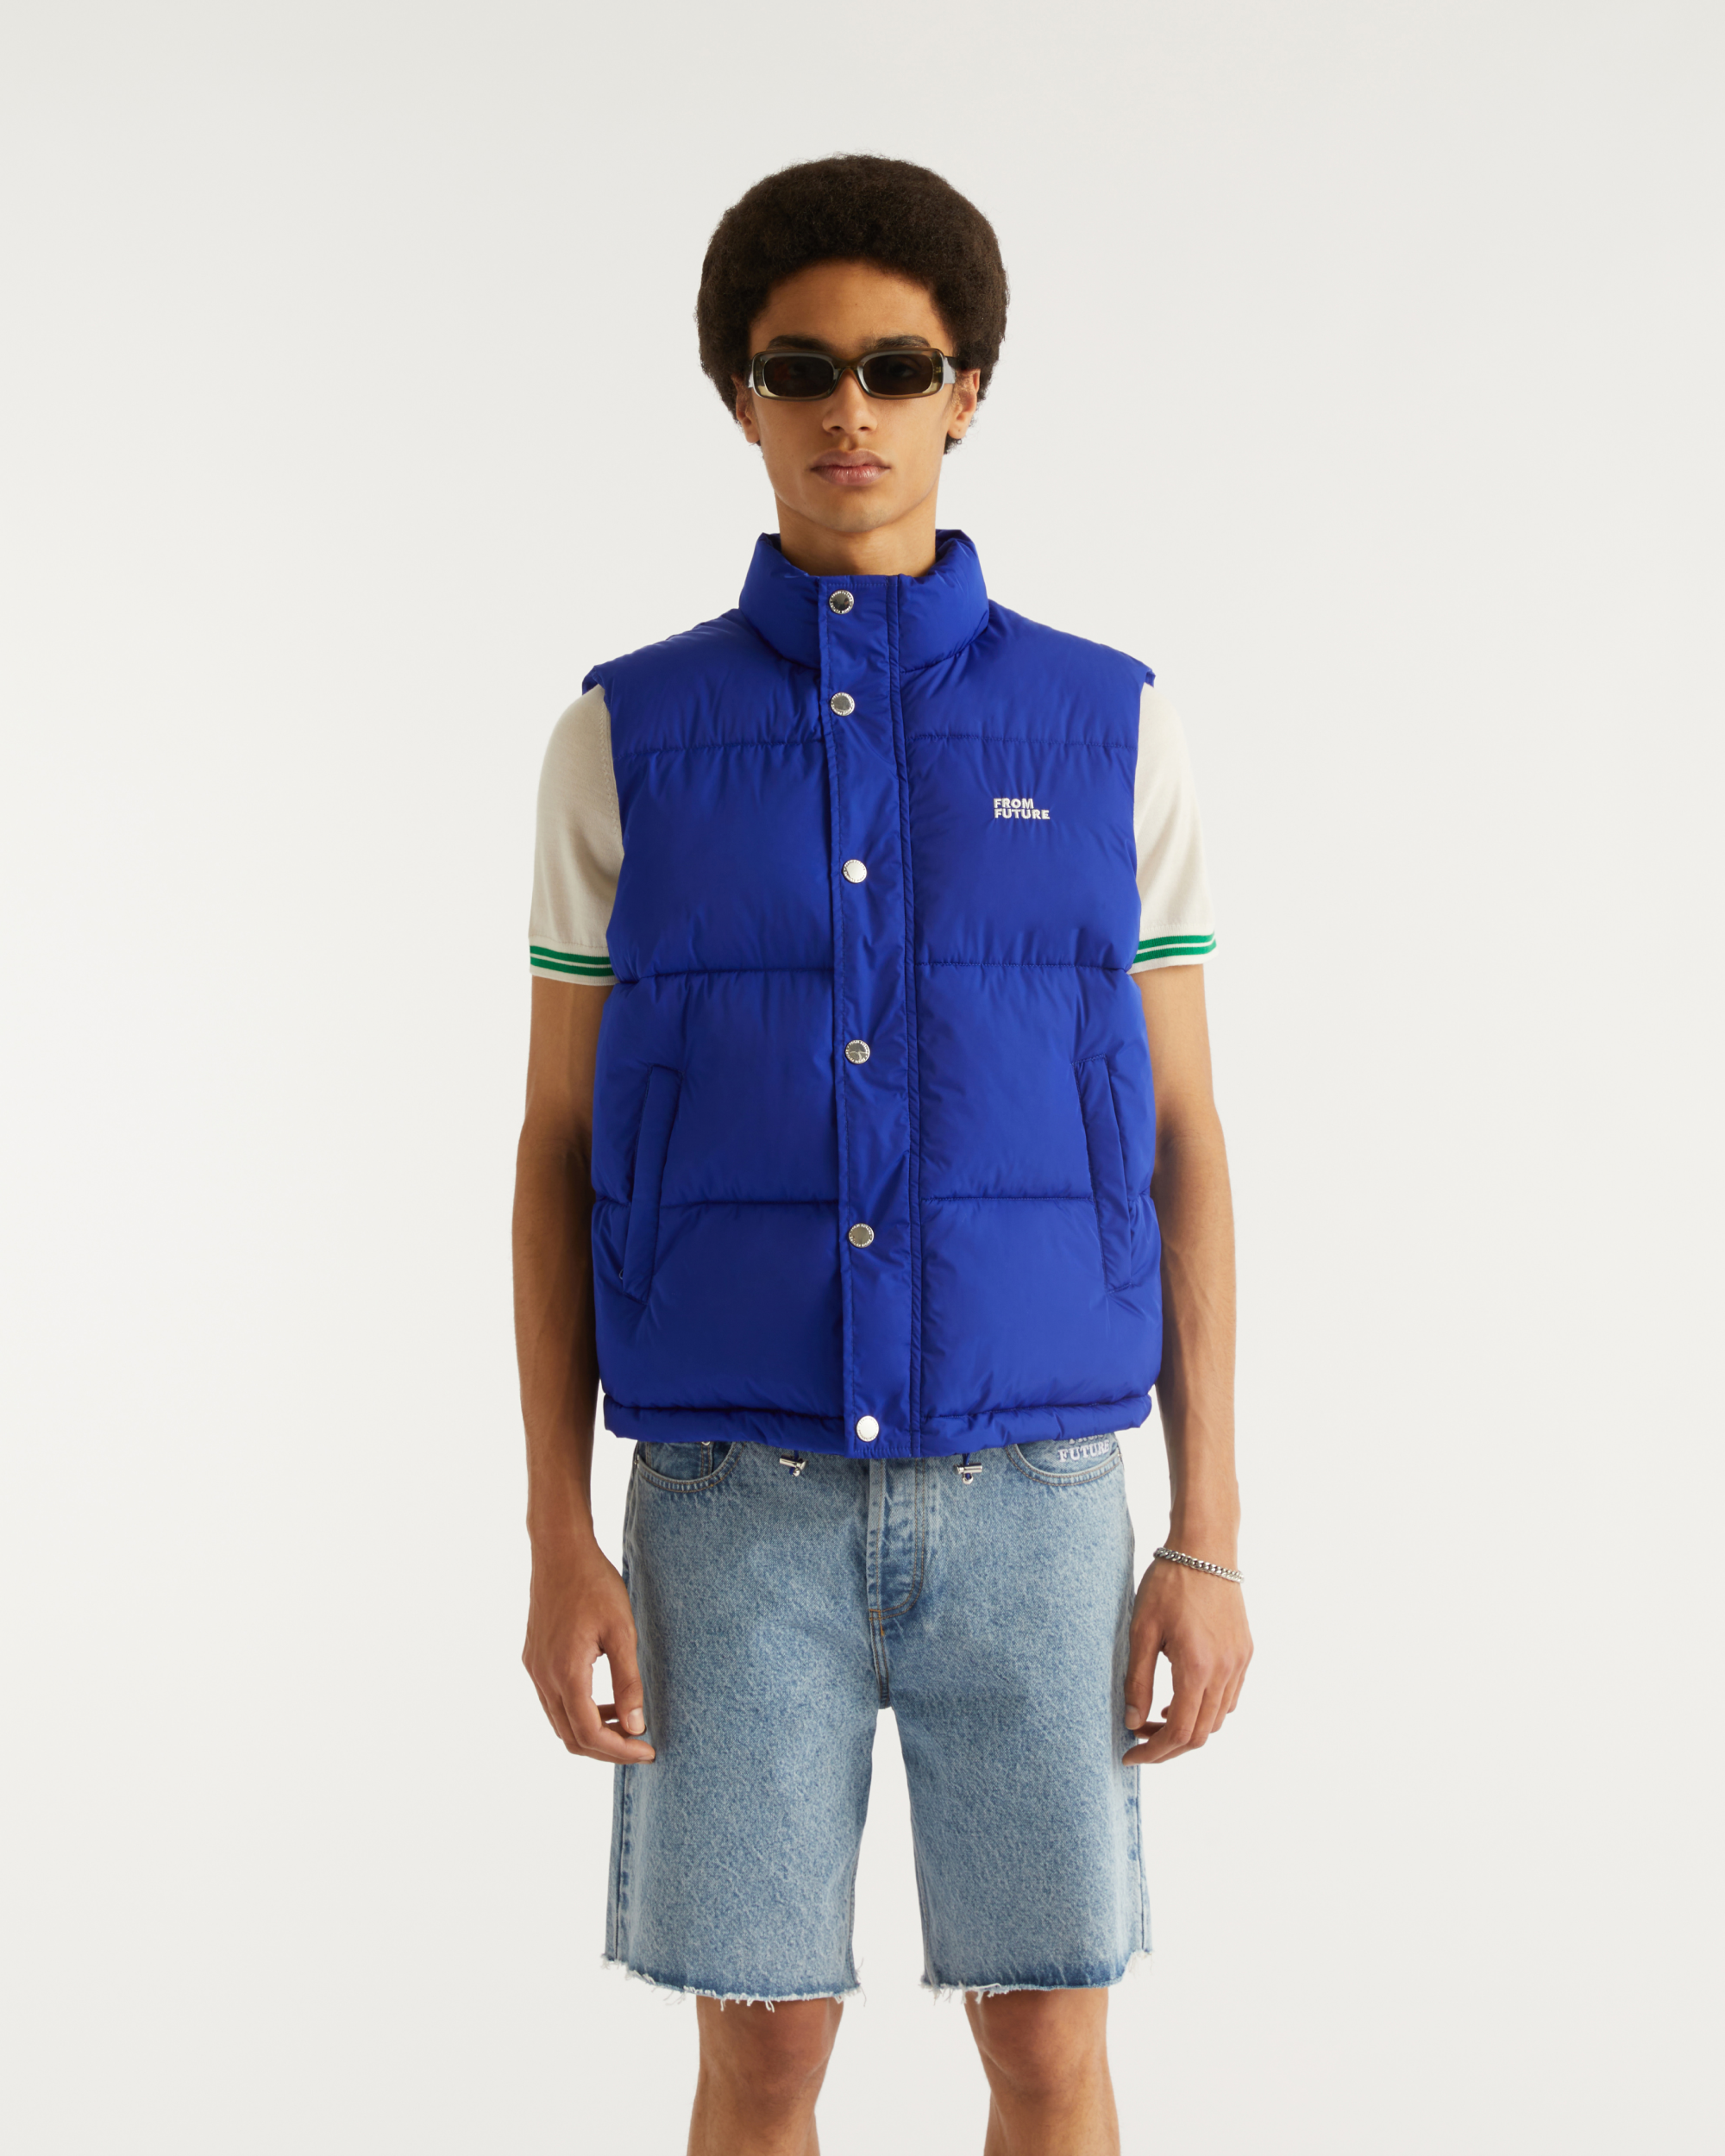 gilet from future